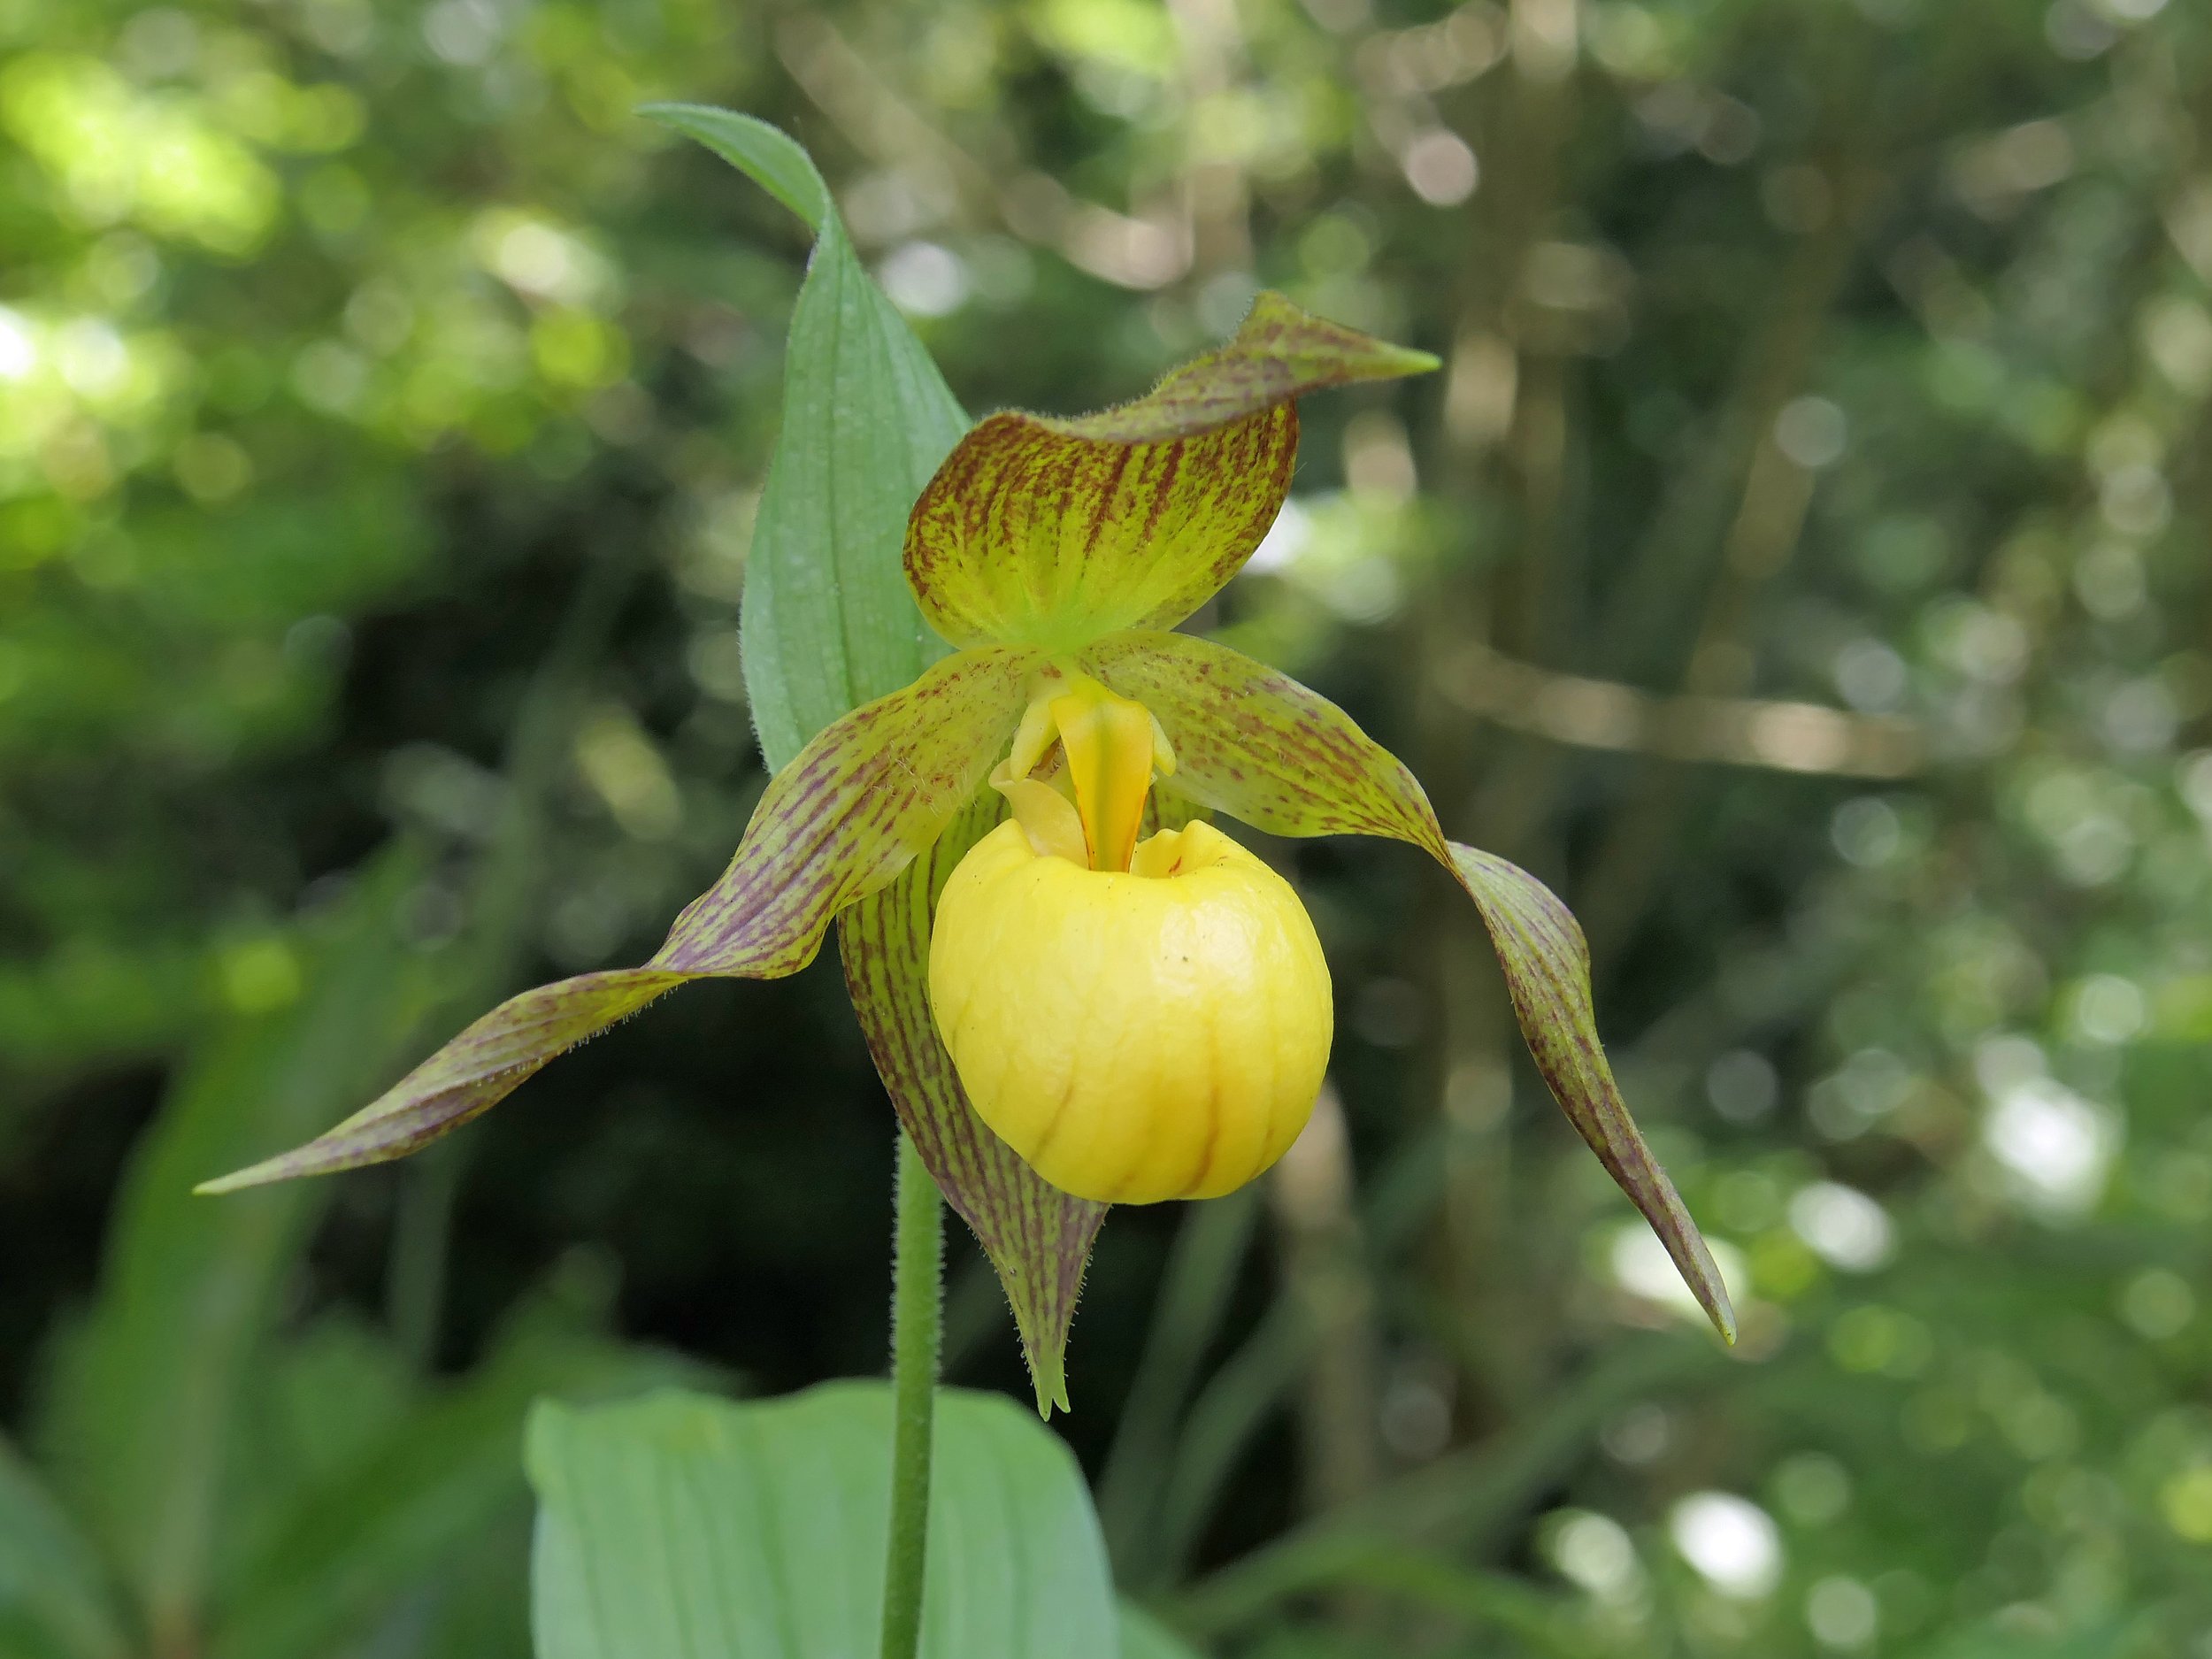 Shorelines » Blog Archive Medicine, Myth and the Lady's Slipper Orchid -  Shorelines